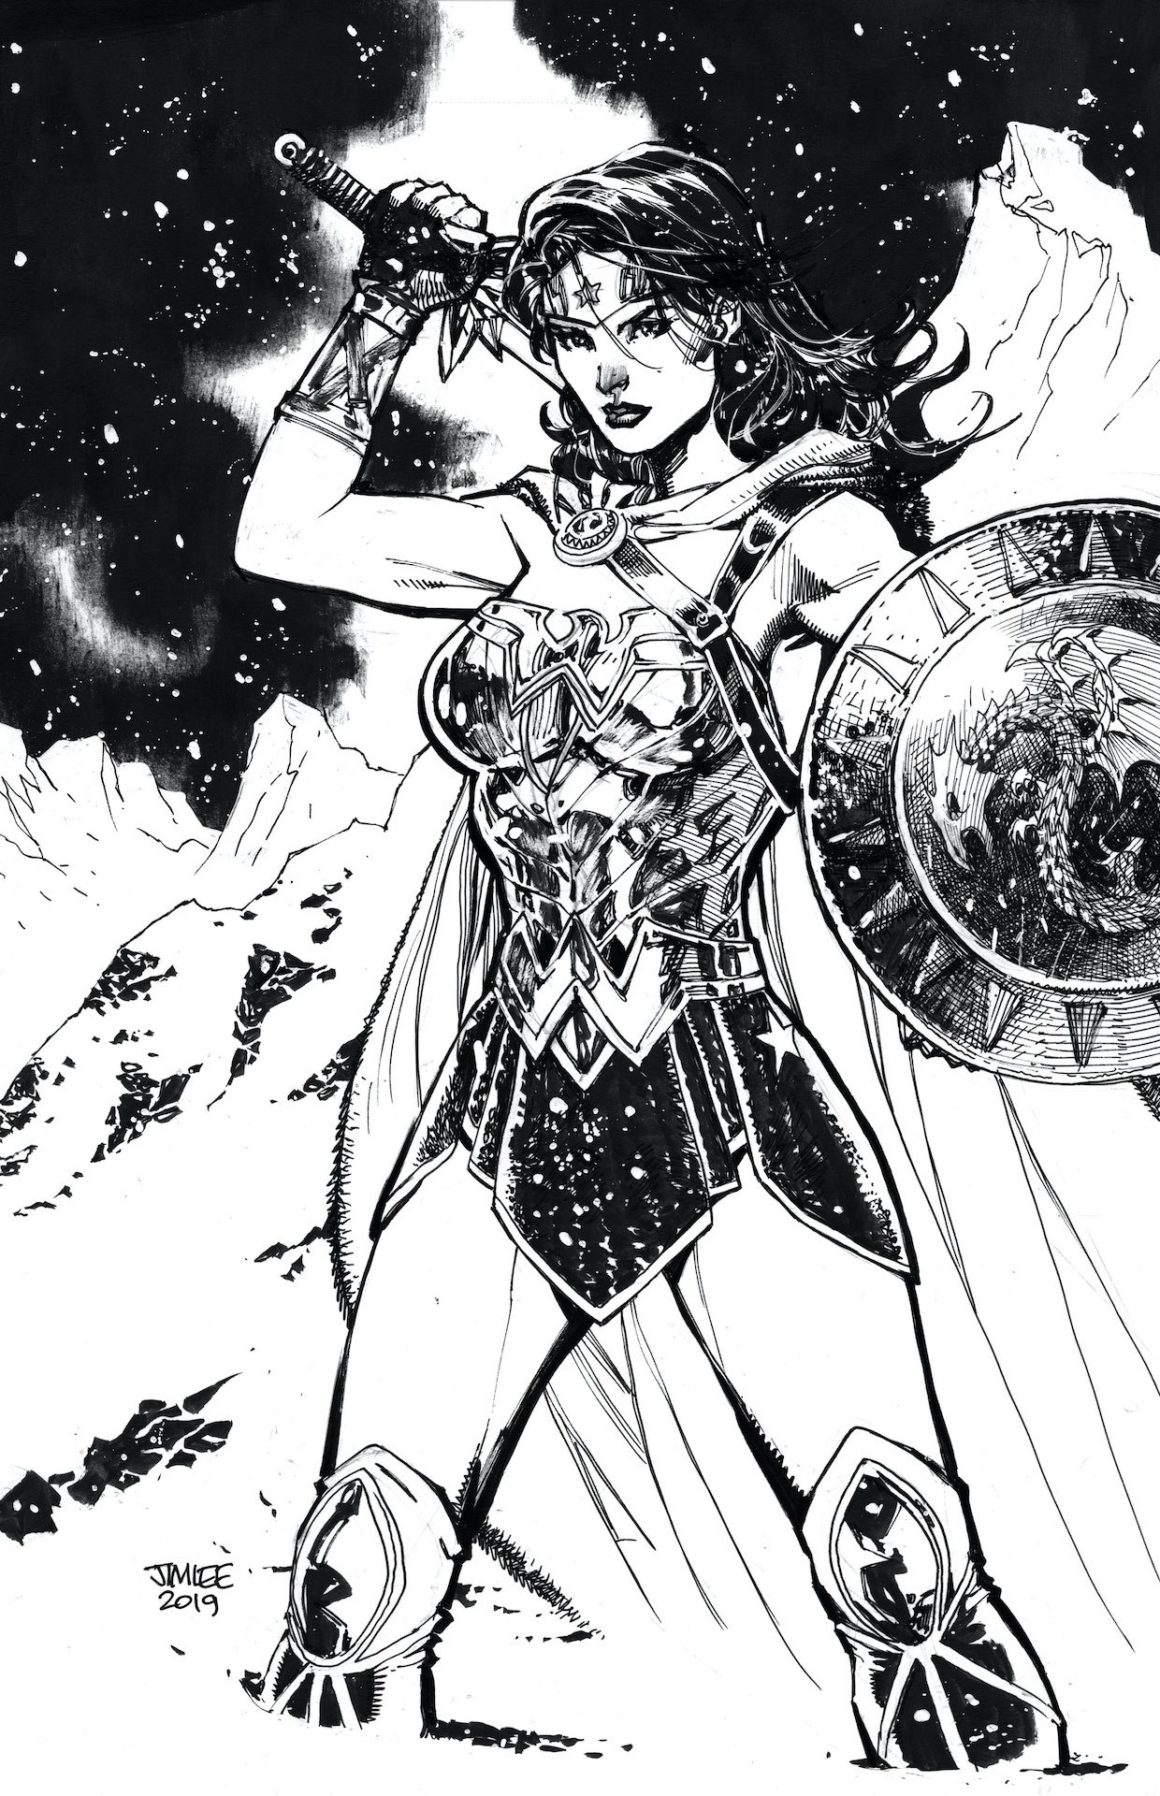 Variant cover by Jim Lee for Wonder Woman #759. Photo: DC Comics